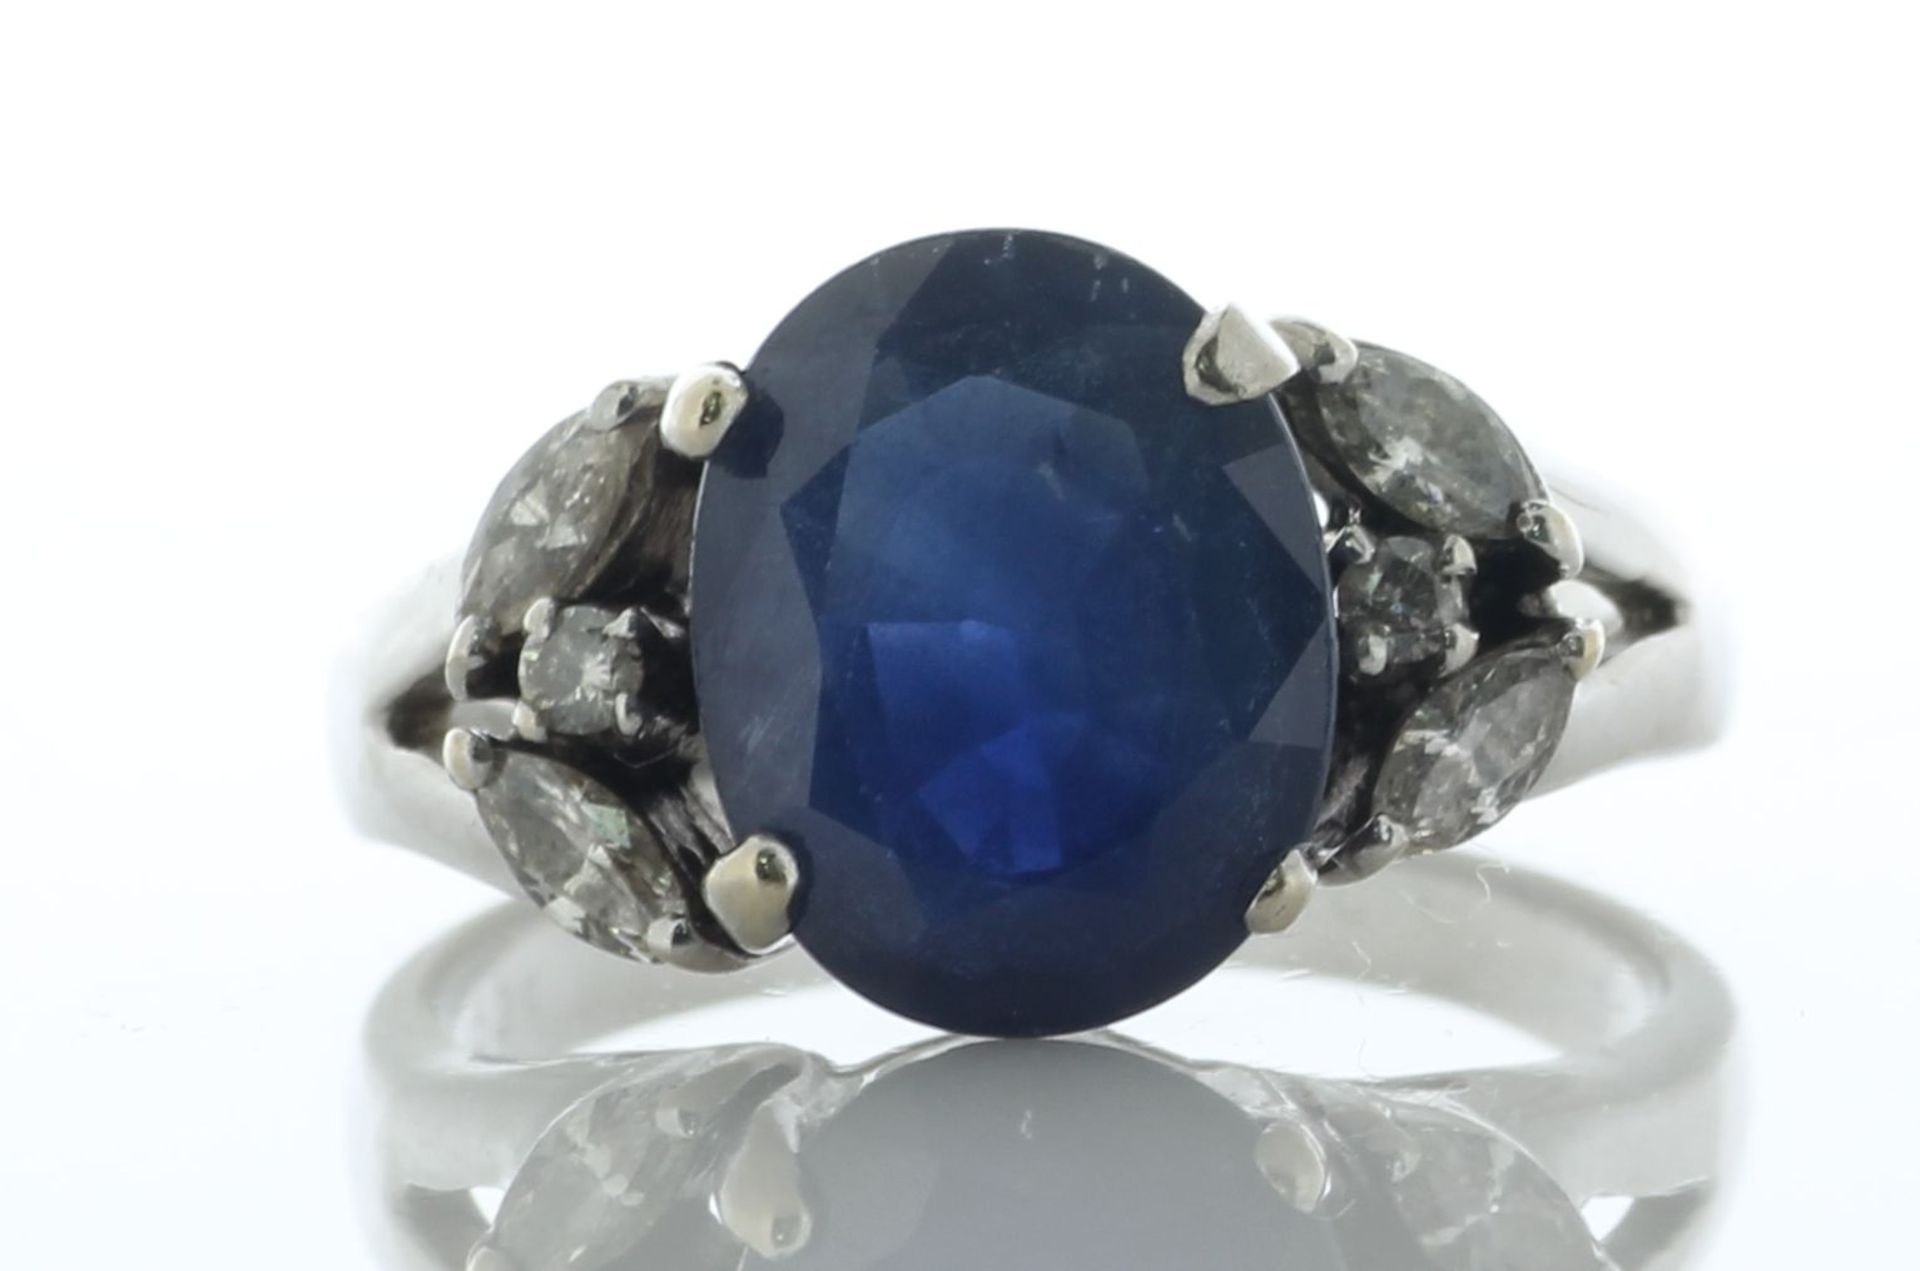 18ct White Gold Diamond And Sapphire Ring (S5.00) 0.35 Carats - Image 4 of 5